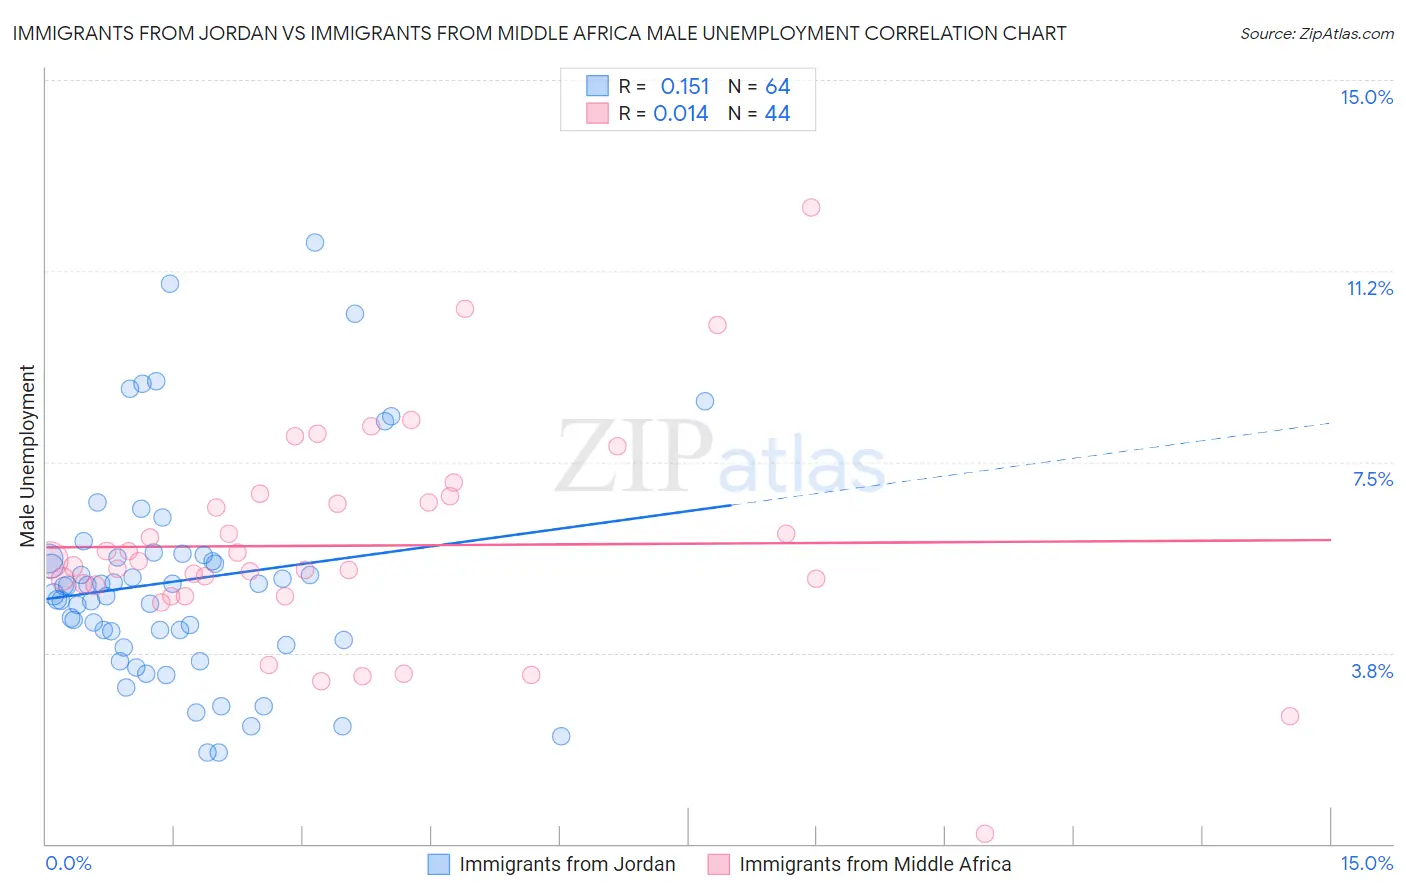 Immigrants from Jordan vs Immigrants from Middle Africa Male Unemployment